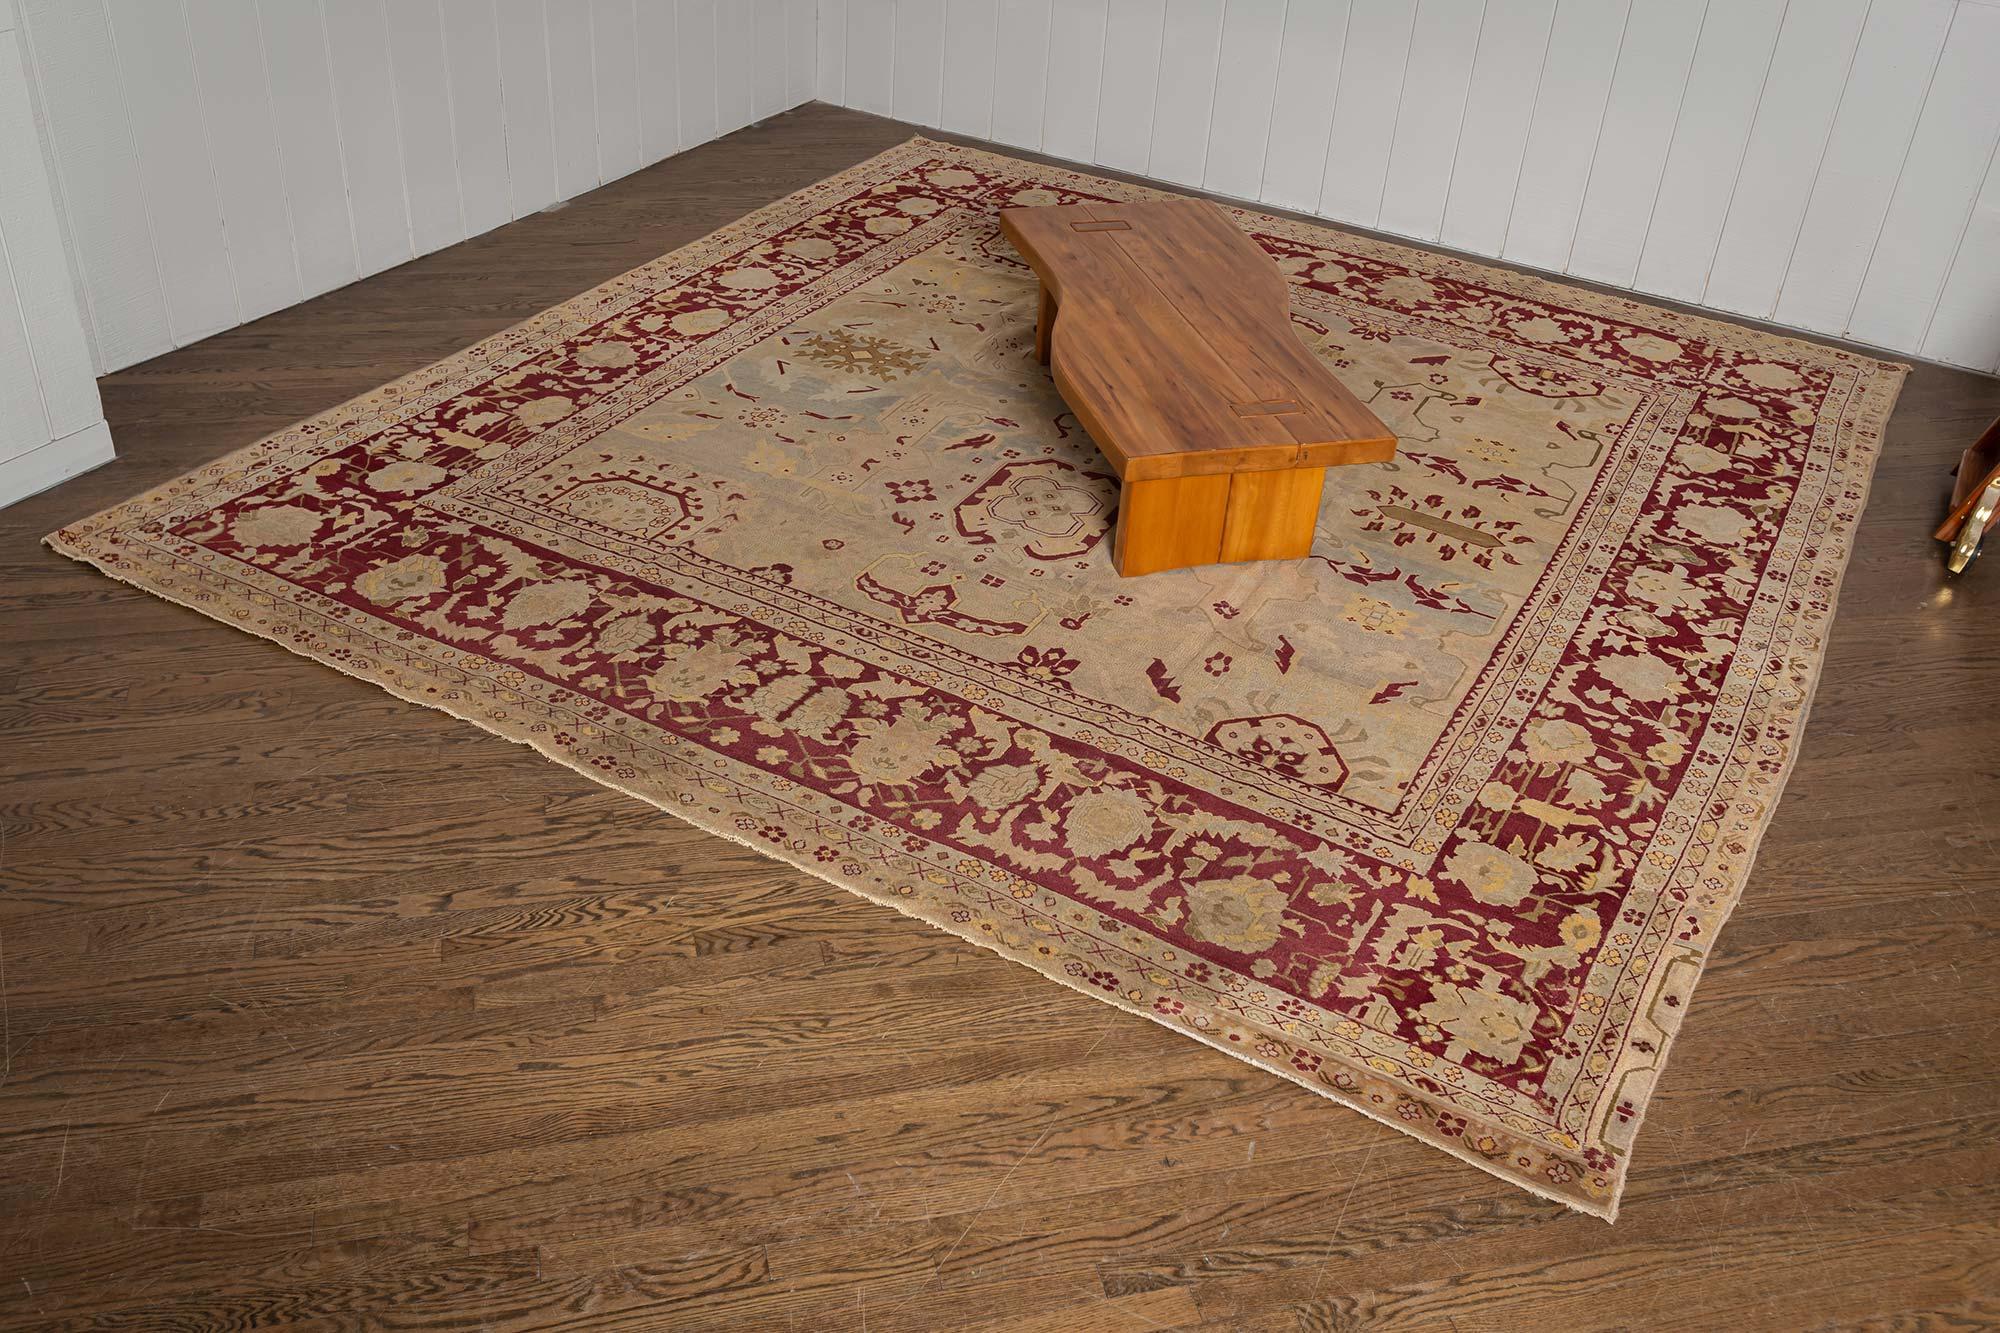 High-quality Early 20th century Indian Agra rug.
Size: 10'10